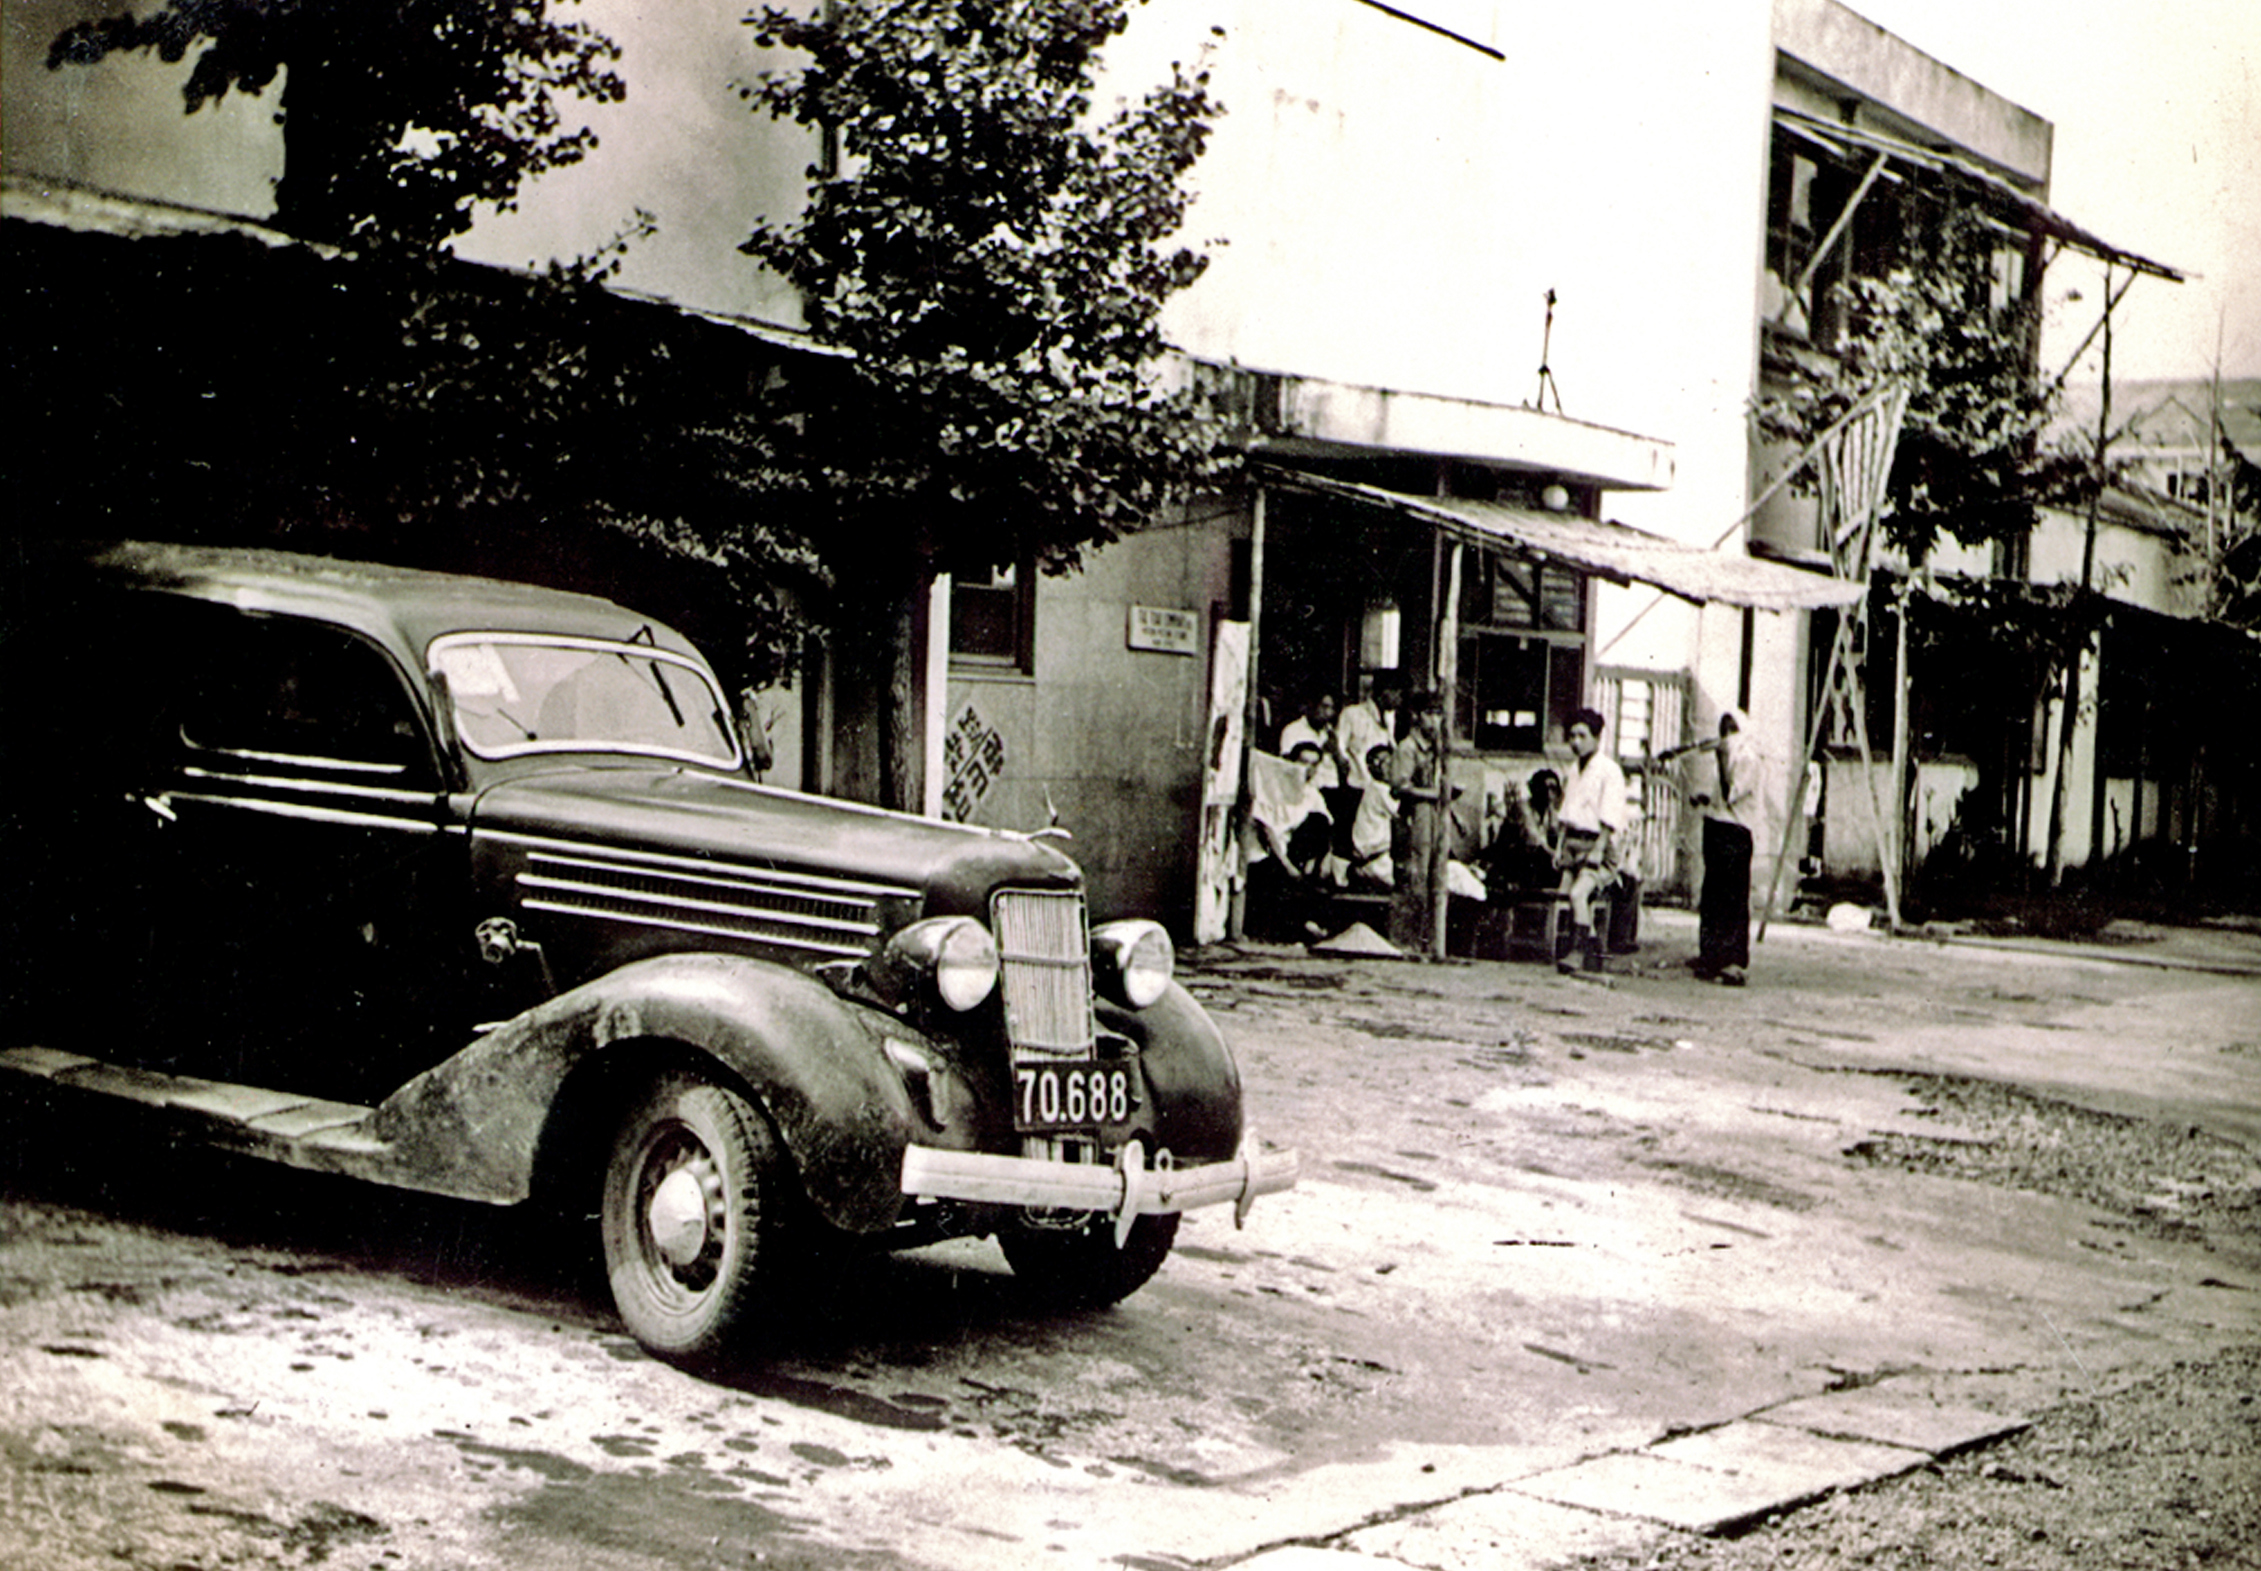 Old vehicle from 1930s-1940s